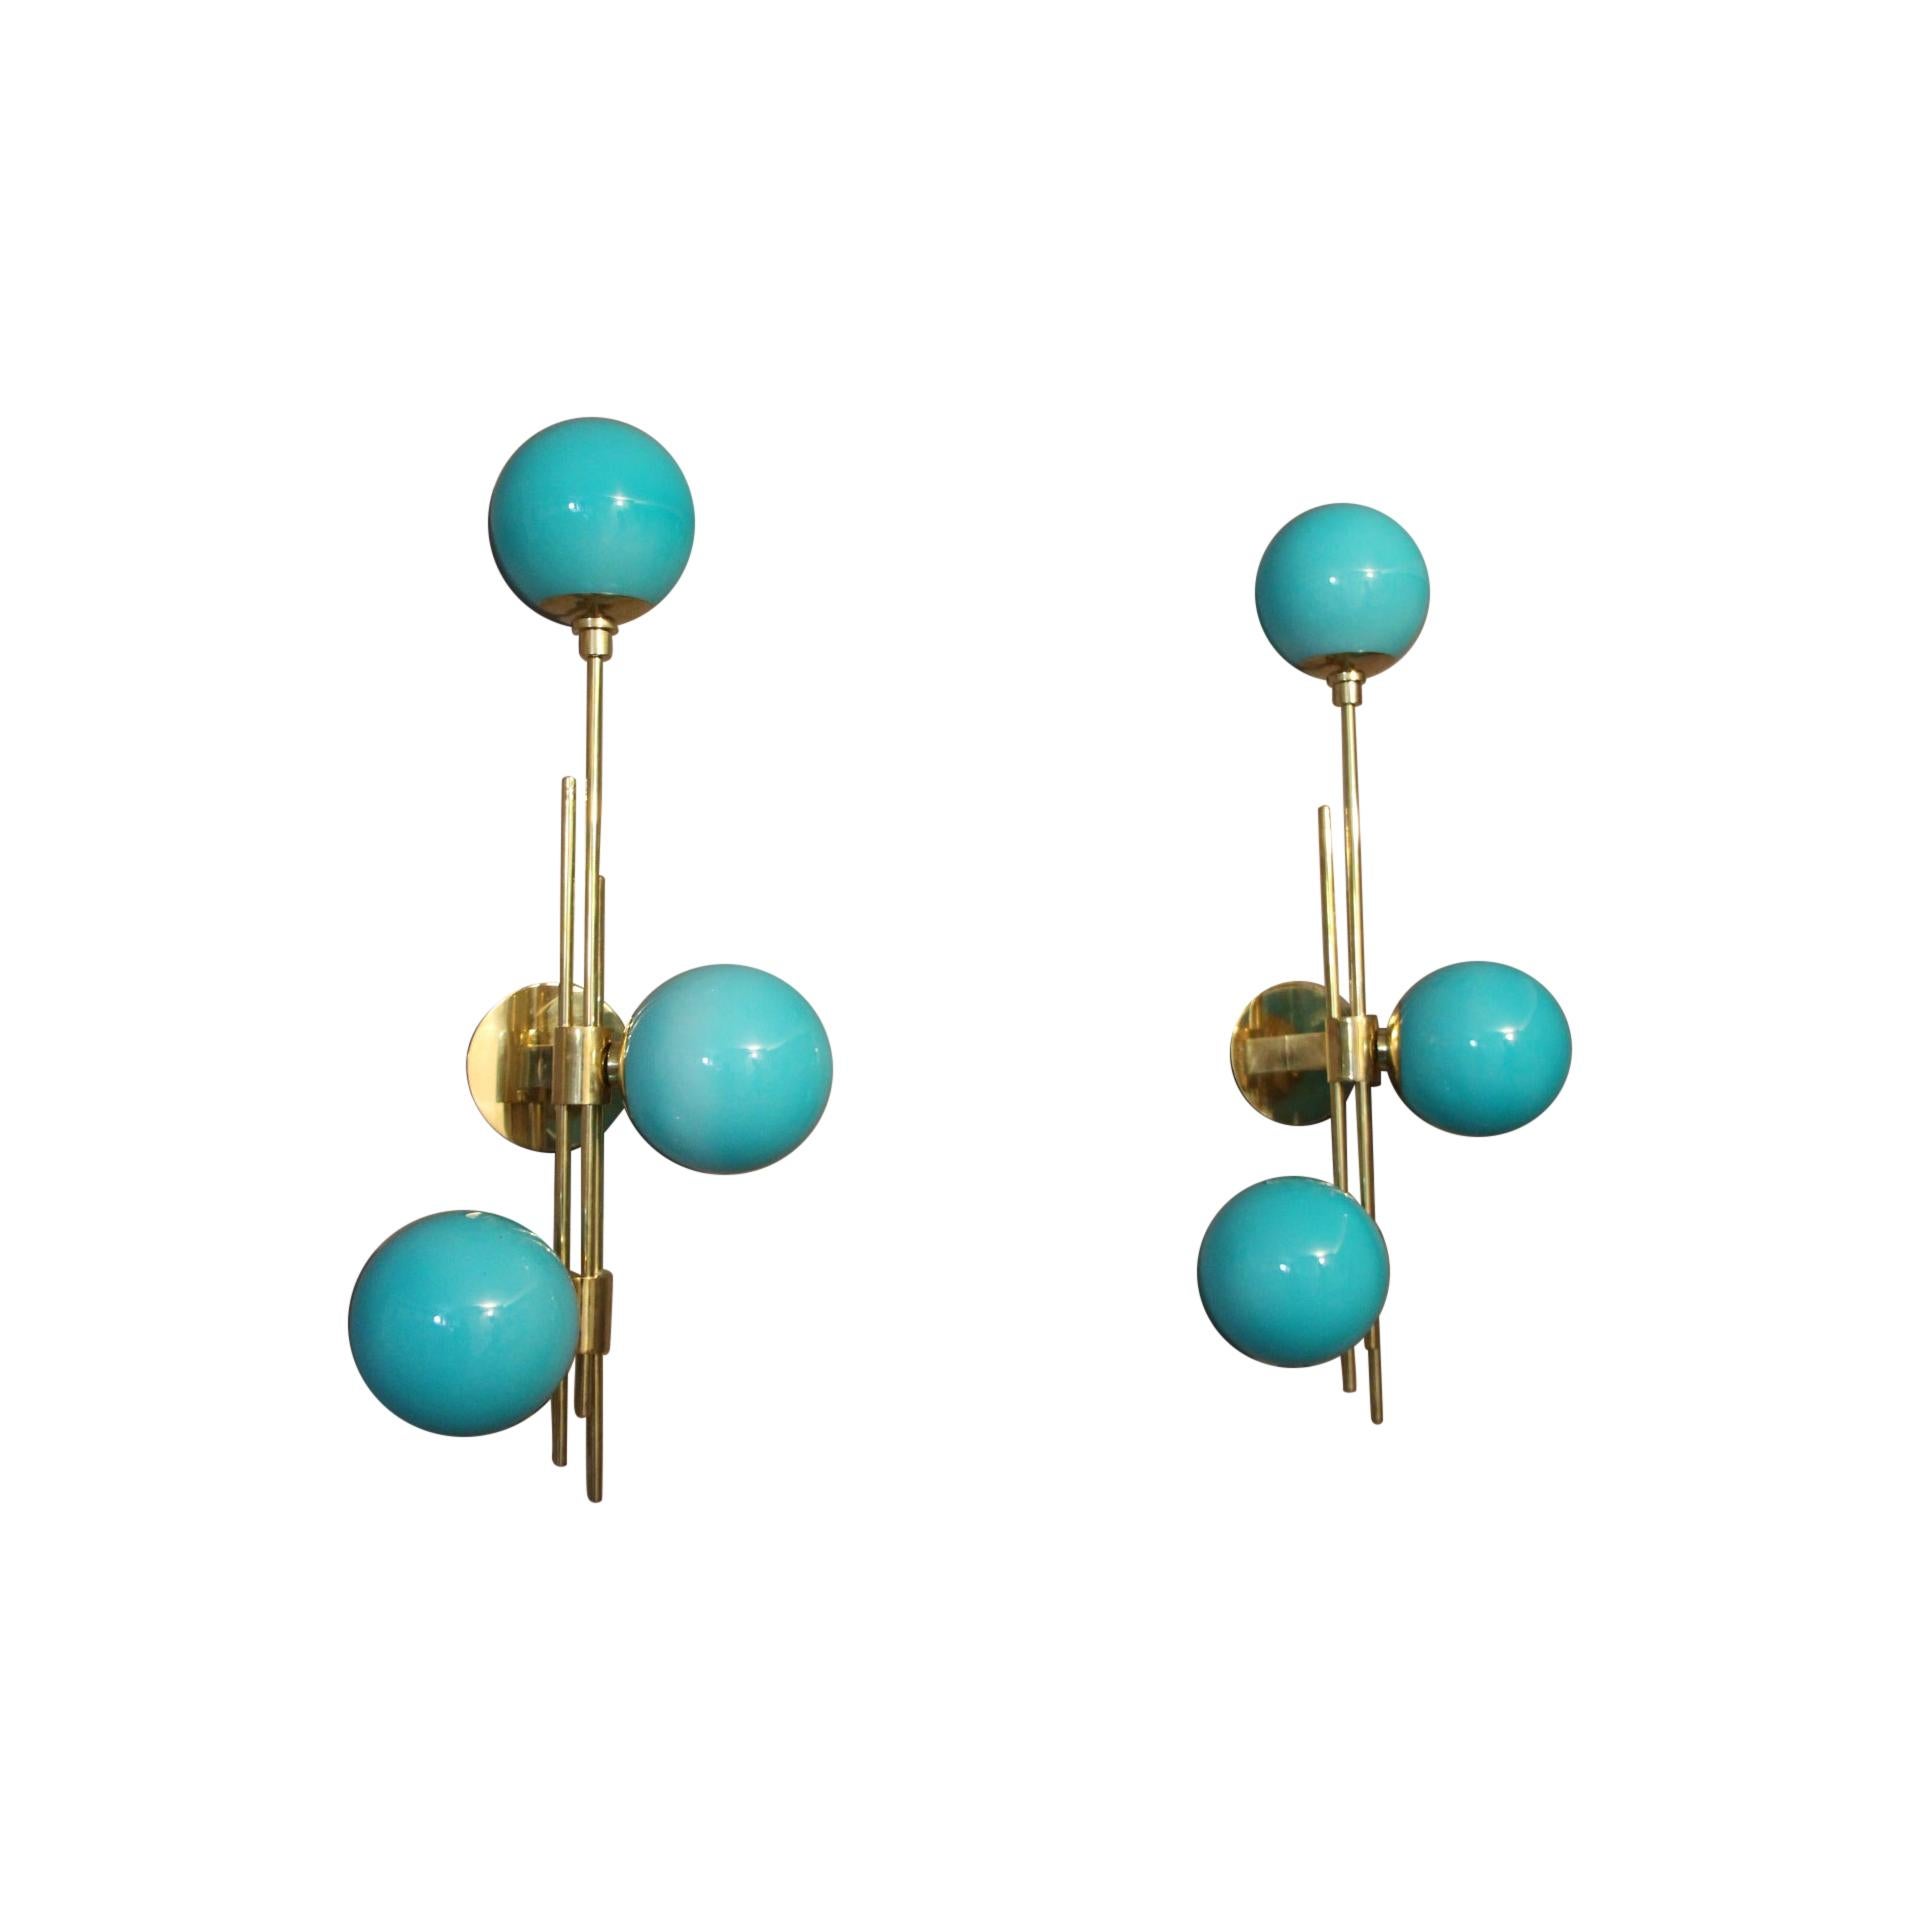 Italian Modern Midcentury Pair of Brass and Turquoise Blue Glass Sconces